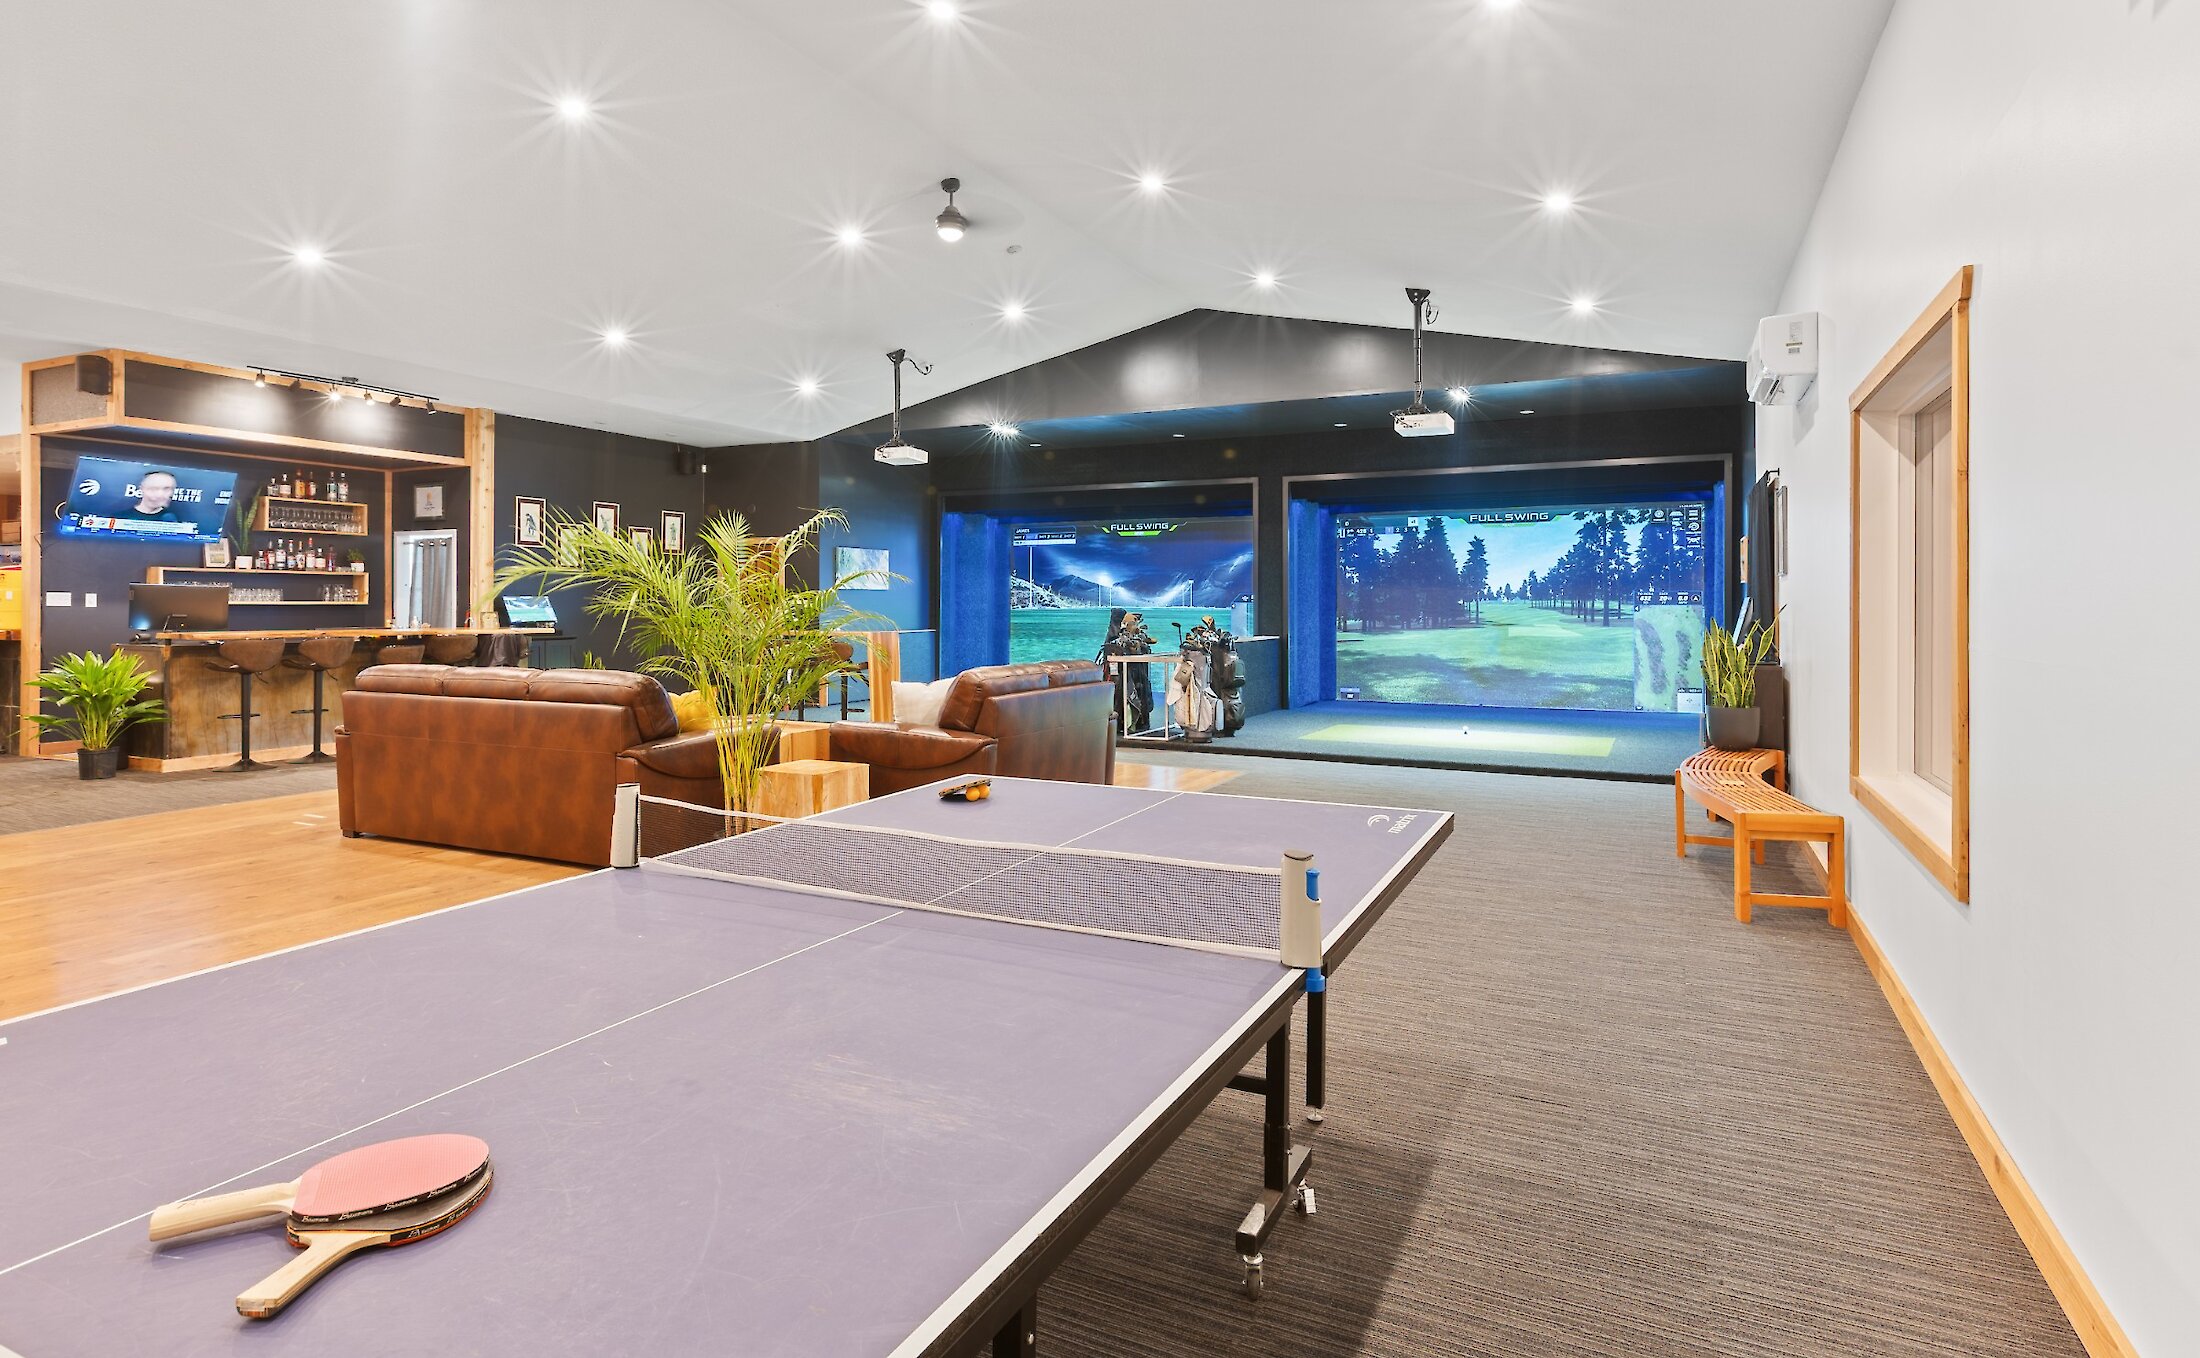 Indoor ping pong table and large room with golf simulators in the background in the Pro Shop at Long Beach Golf Course.